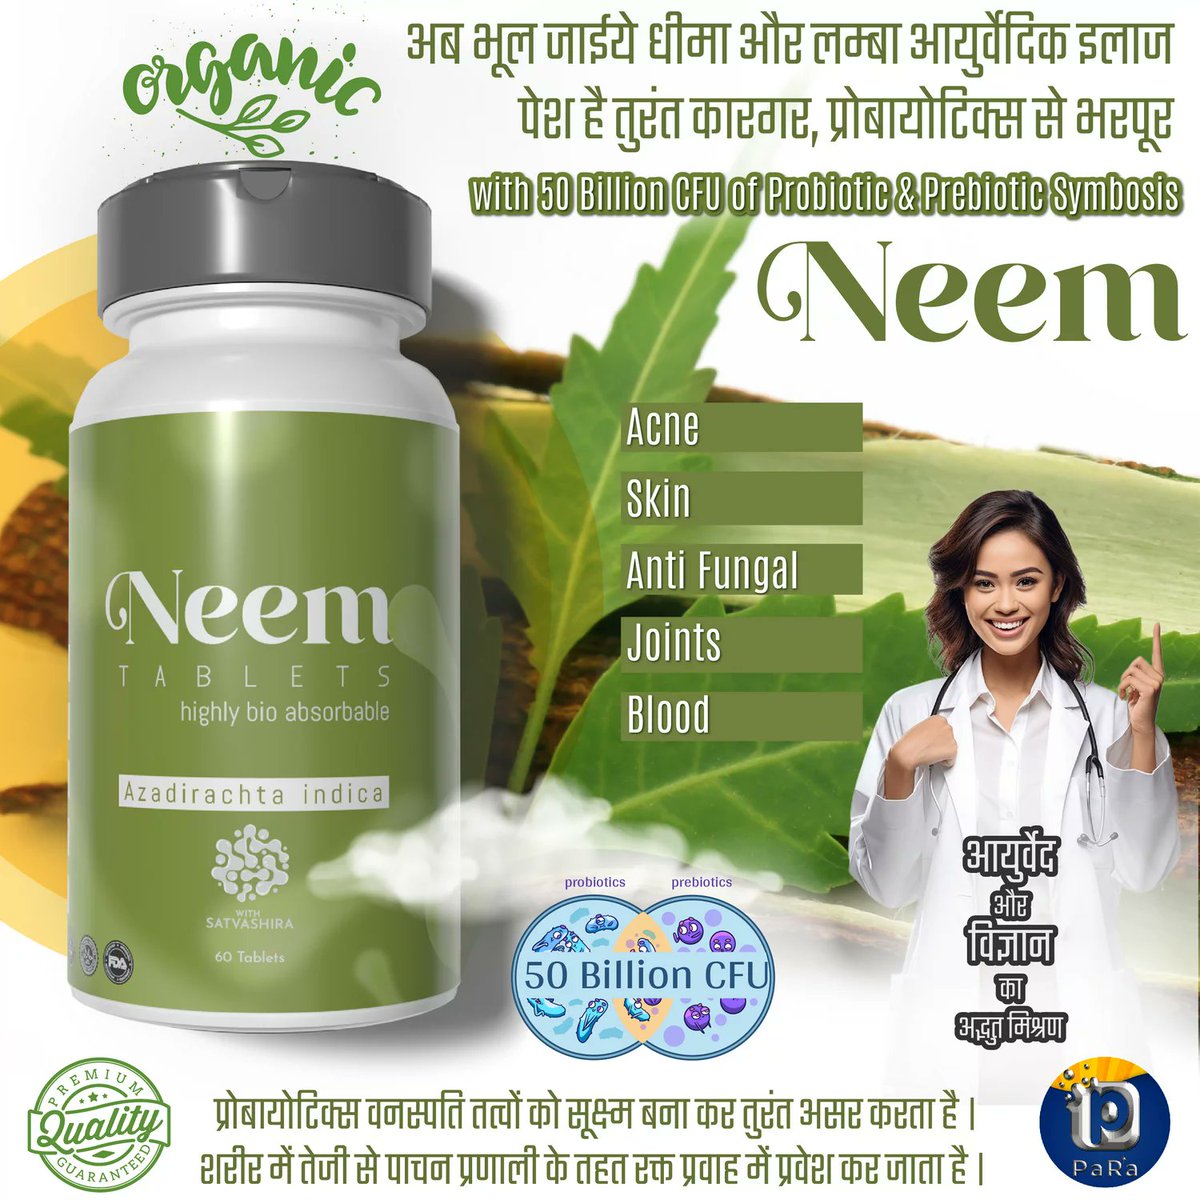 ORGANIC BIO NEEM AND PROBIOTIC (60 TABLETS)
More Information Call 7385071643

#phytoatomy #neem #probiotic #healthcare